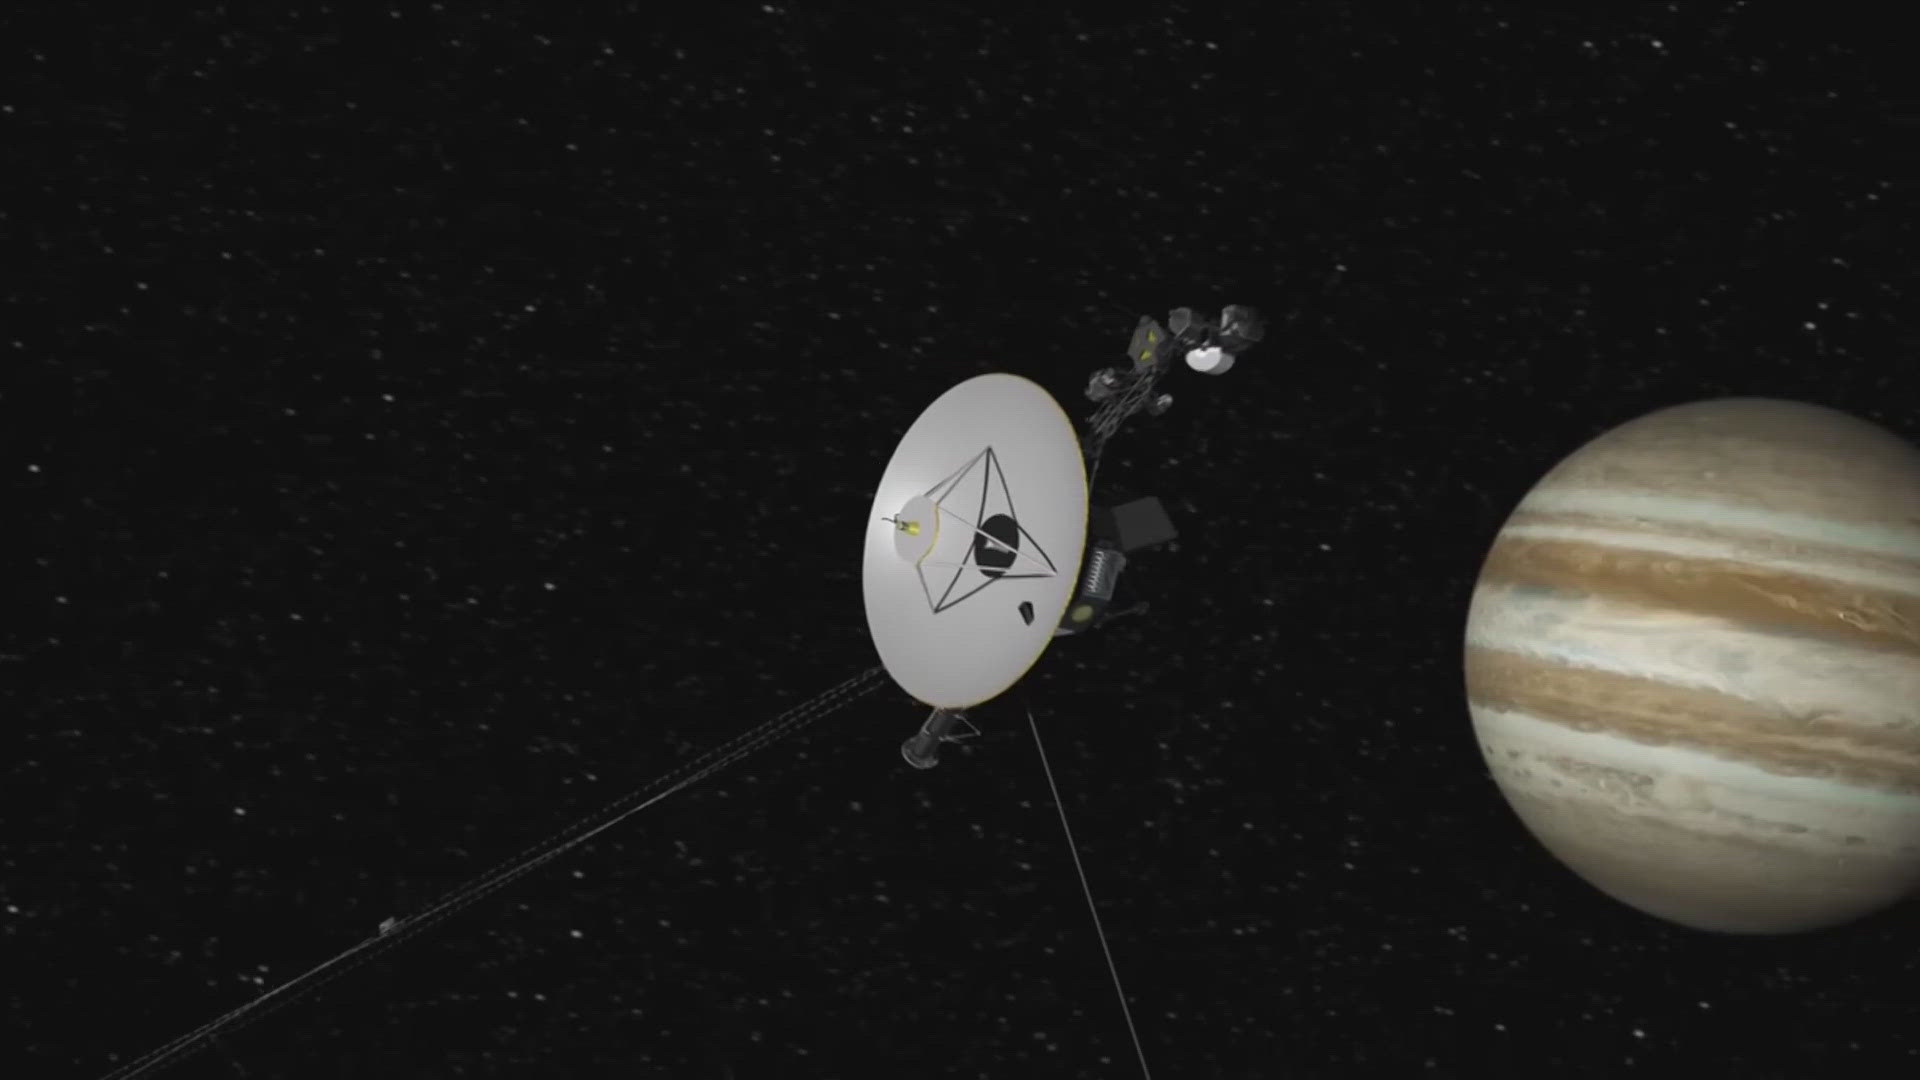 Launched in 1977, Voyager 1 is more than 15 billion miles away in interstellar space.